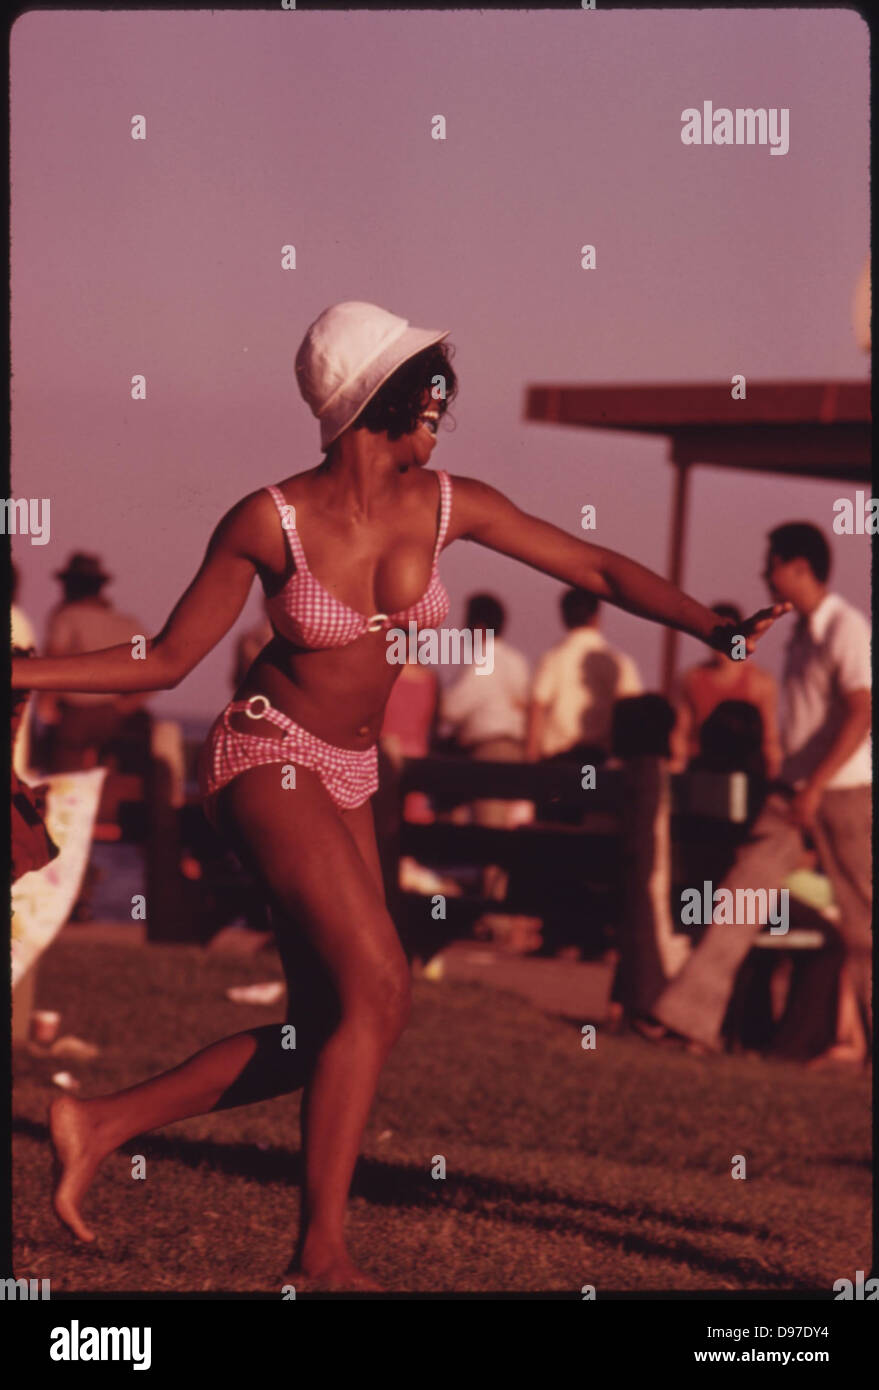 A Swimsuit Clad Black Woman Enjoys Her Summer Outing At Chicago's 12th Street Beach On Lake Michigan, 08/1973 Stock Photo